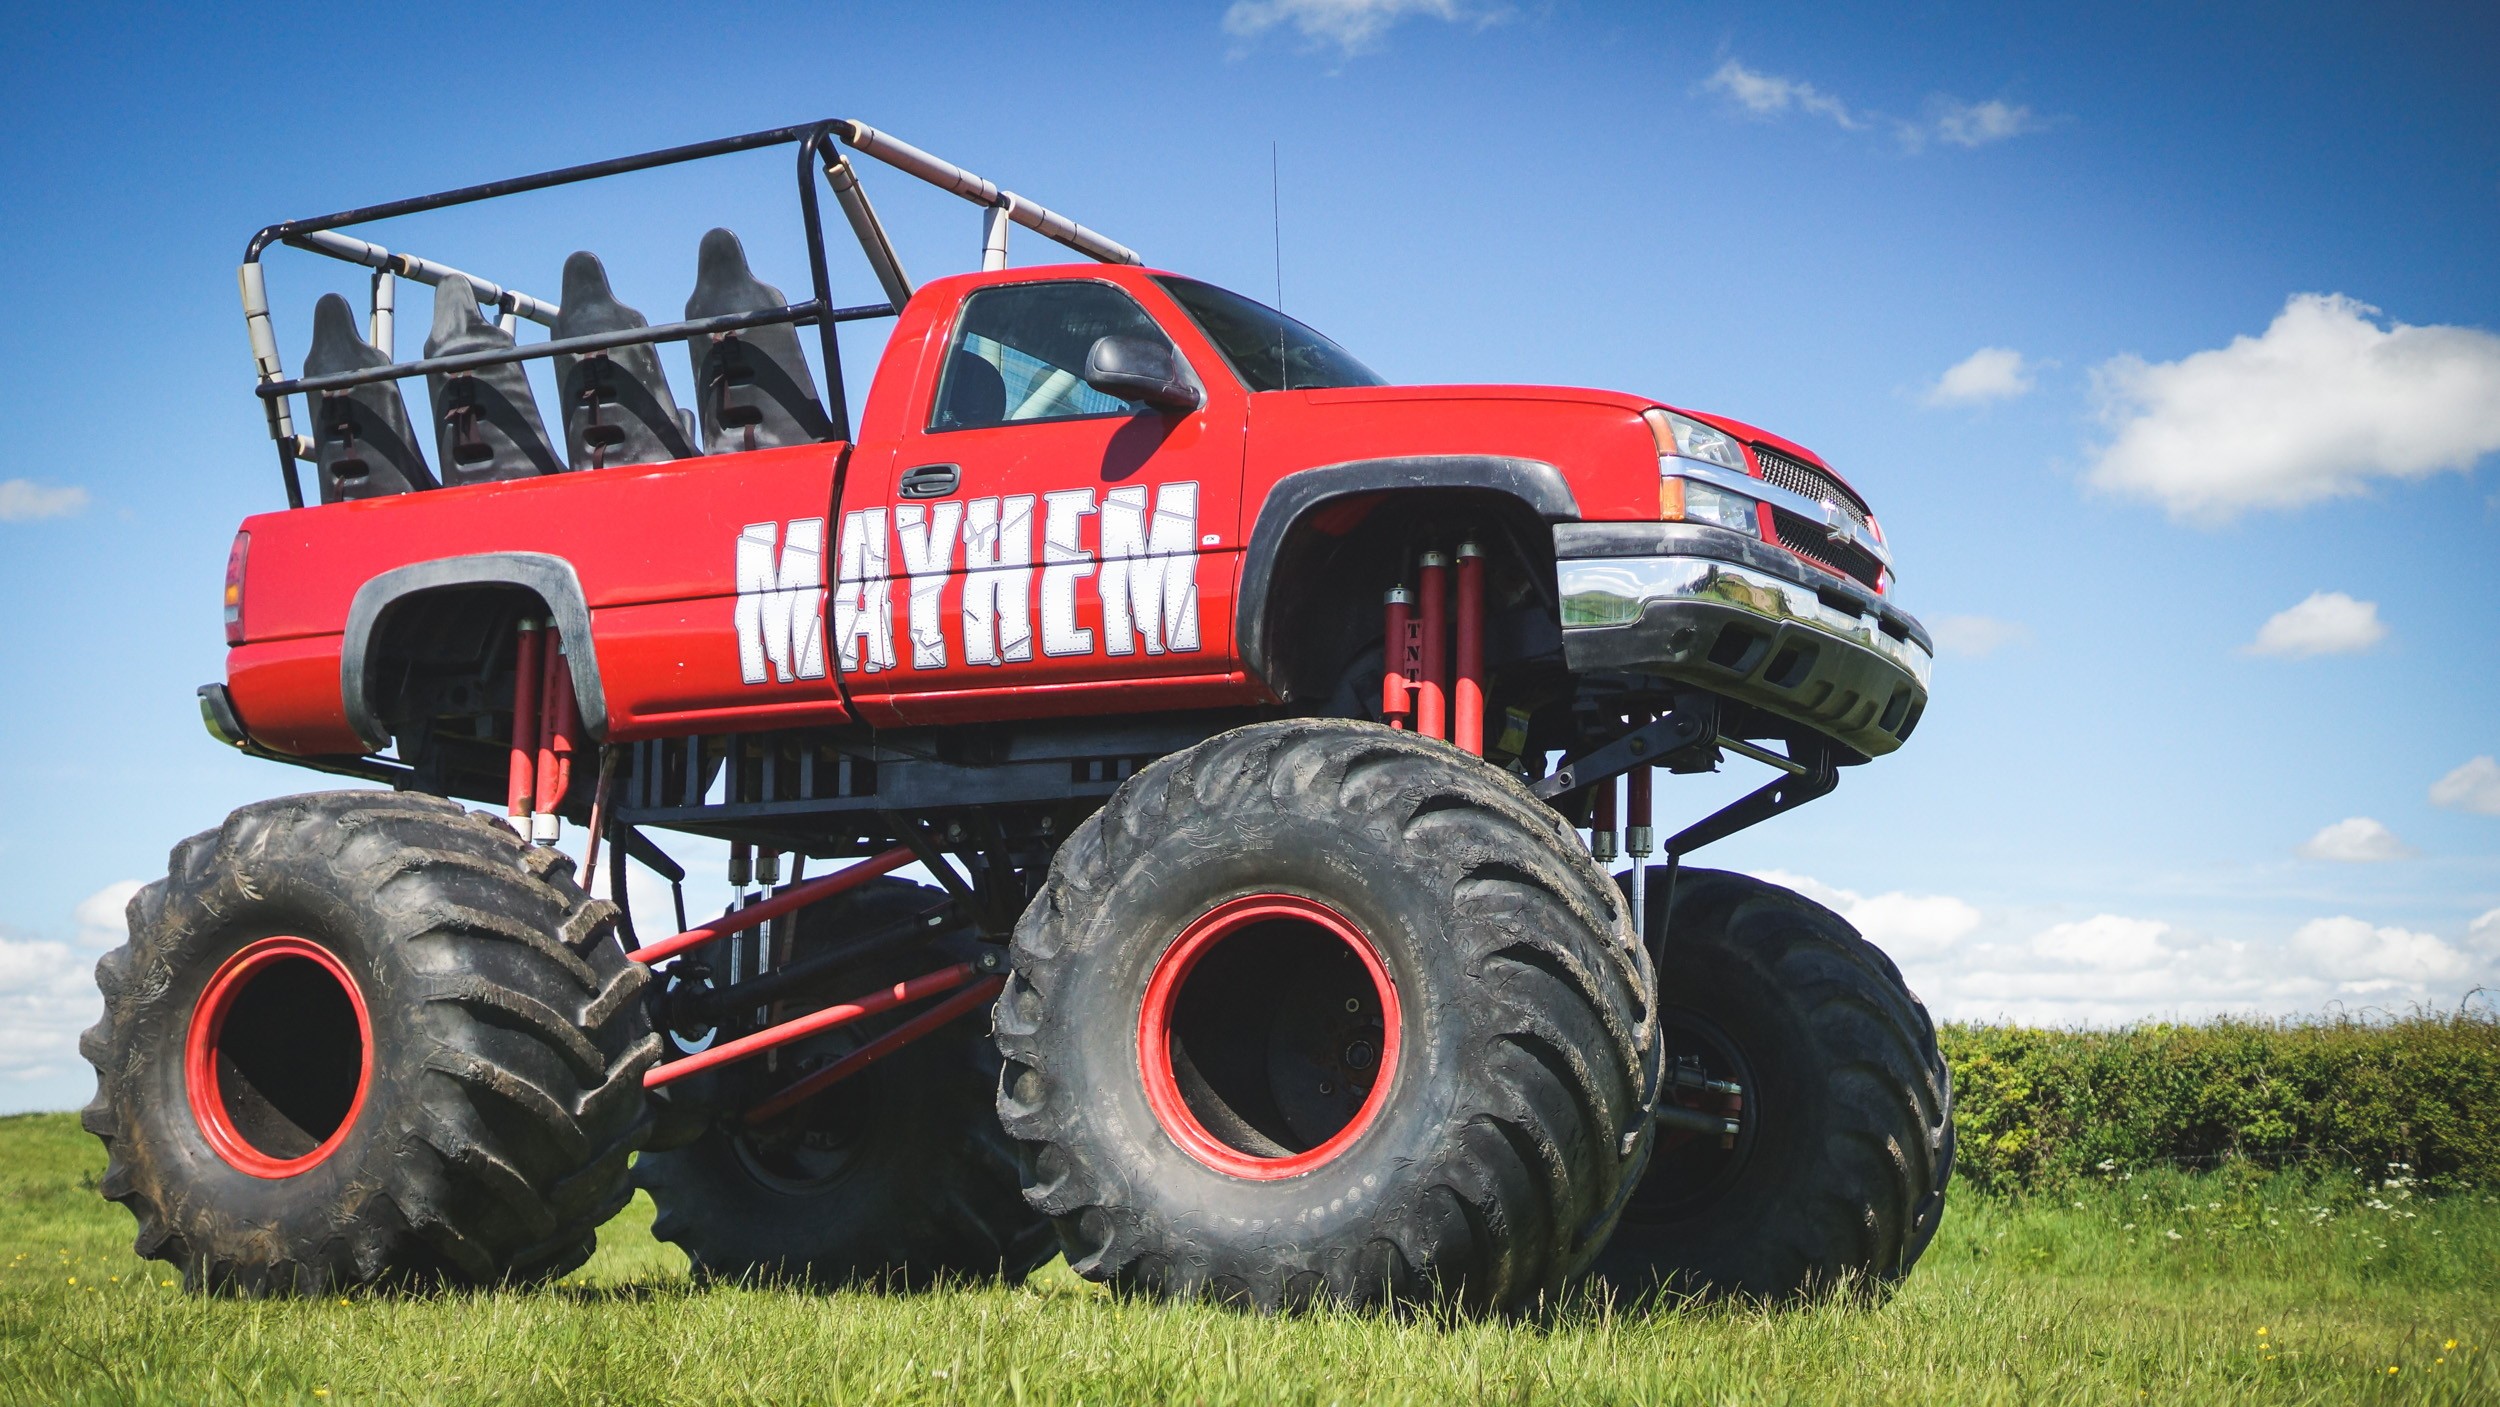 Fancy A Chevrolet Silverado Hd Monster Truck This Ones For Sale In